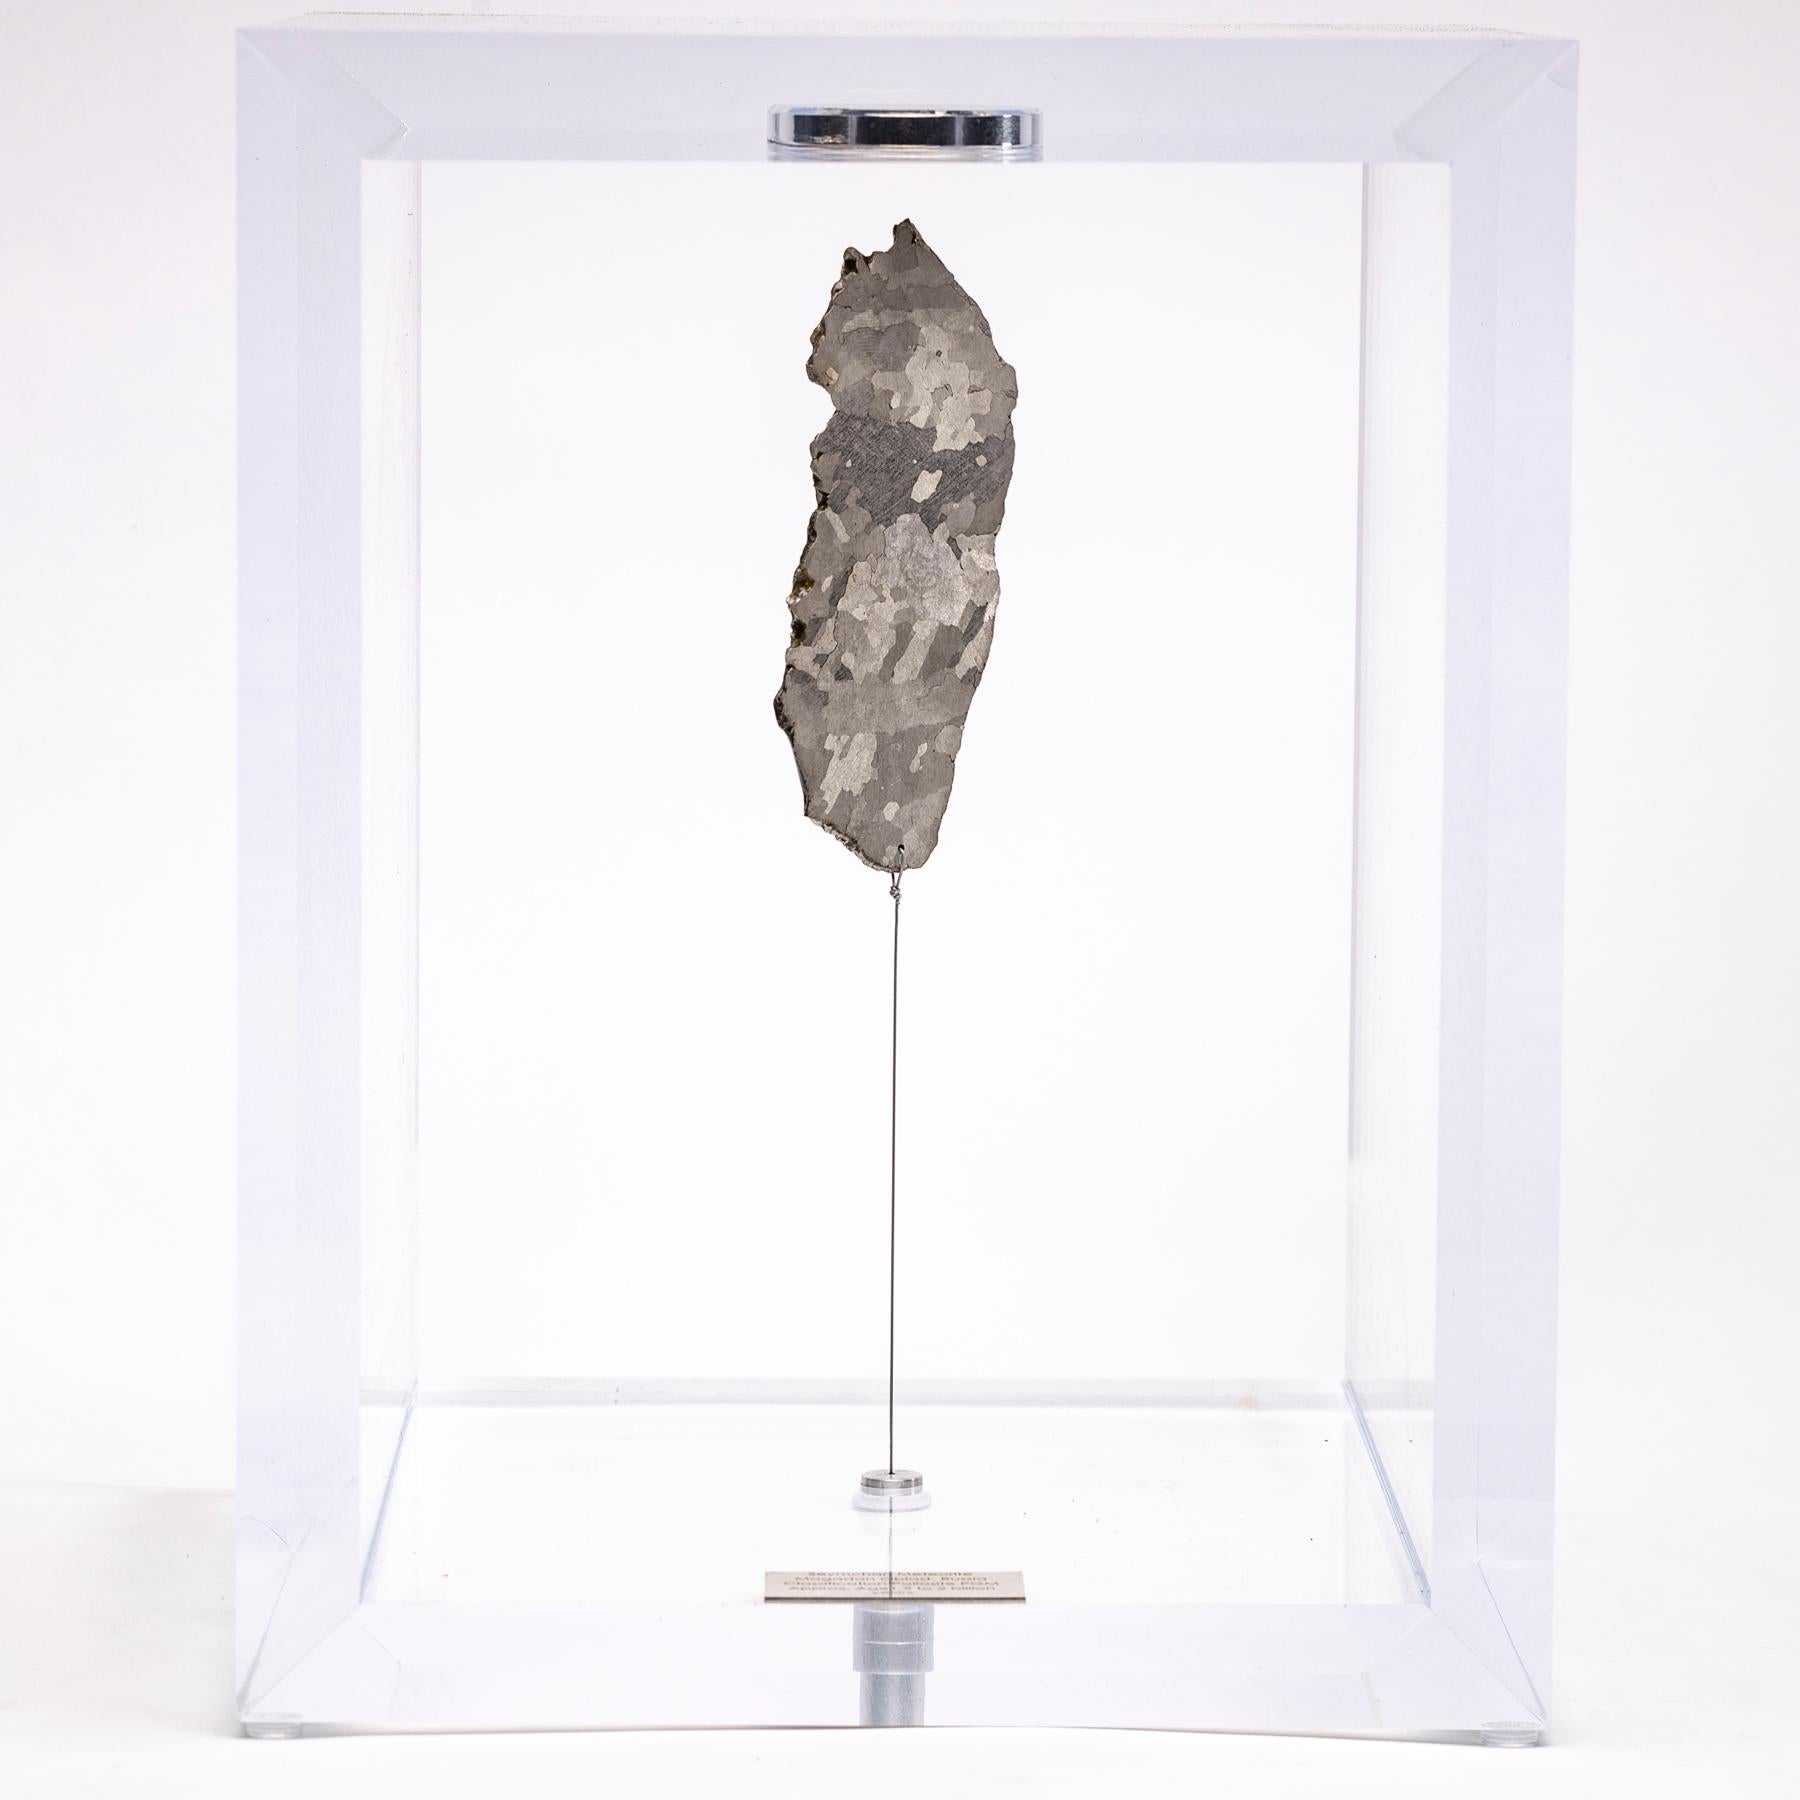 The “Space Box” was designed by Ernesto Duran, as a creative way to enhance the uniqueness of meteorites and could also be use as a decorative piece. It´s an acrylic box with a magnet on top and a steel string pulling the meteorite straight